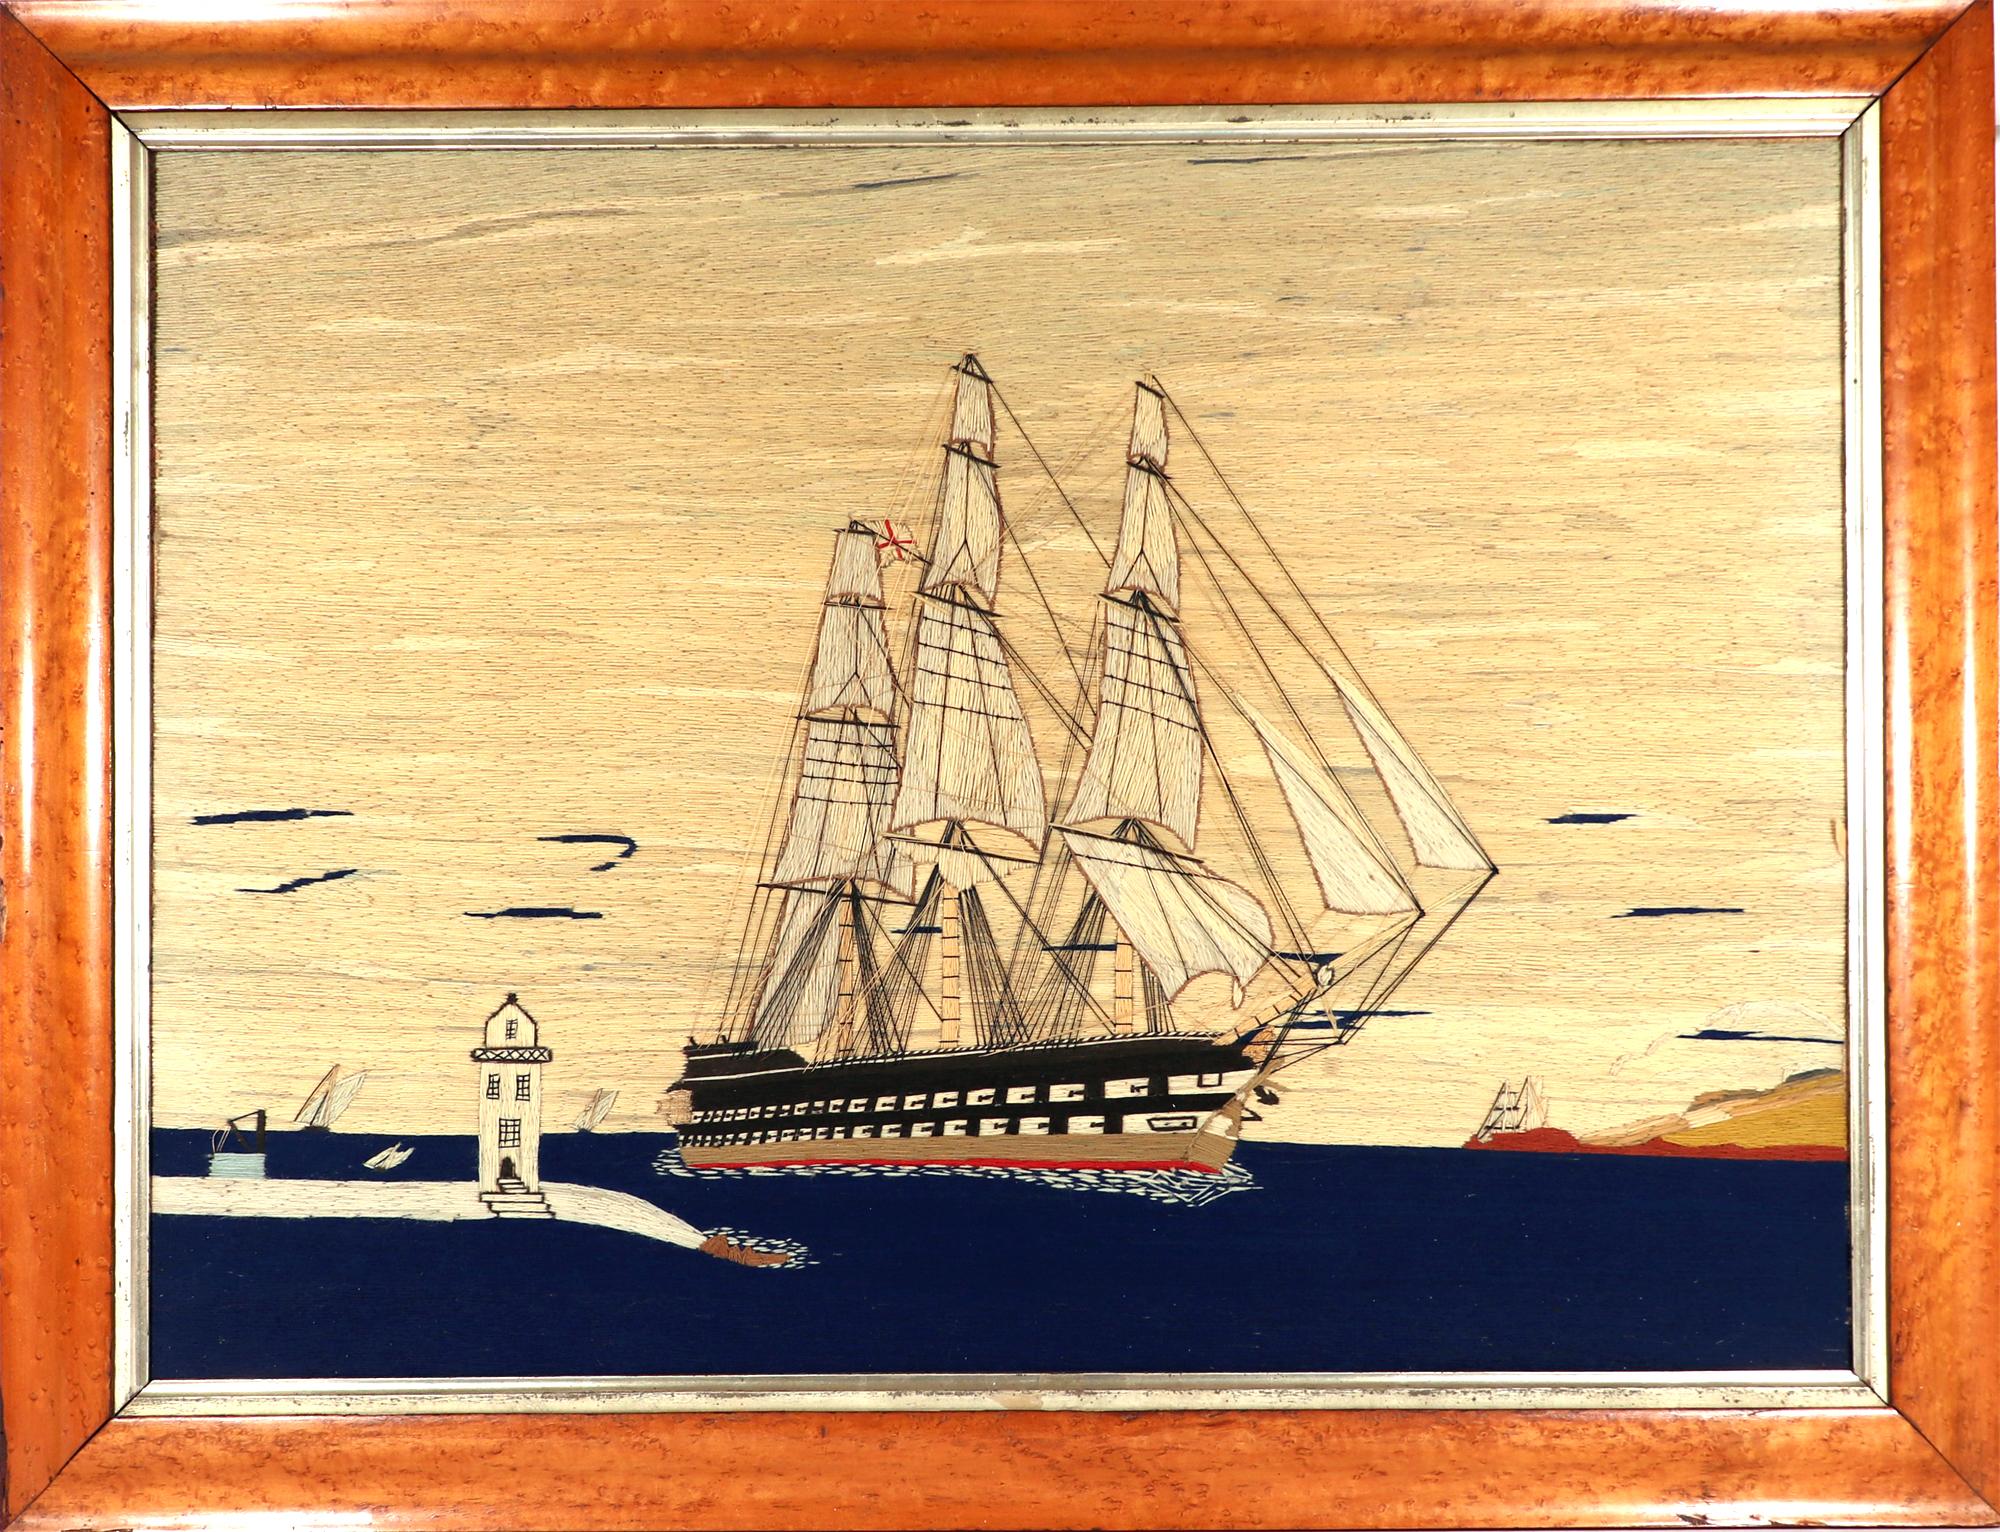 Sailor's Woolwork of Royal Navy Second Rate Battleship Coming into Port,
Circa 1865

The British sailor's woolwork has a dramatic view of a Royal Navy Second Rate Battleship coming into port dynamically, showing a starboard view from the front,